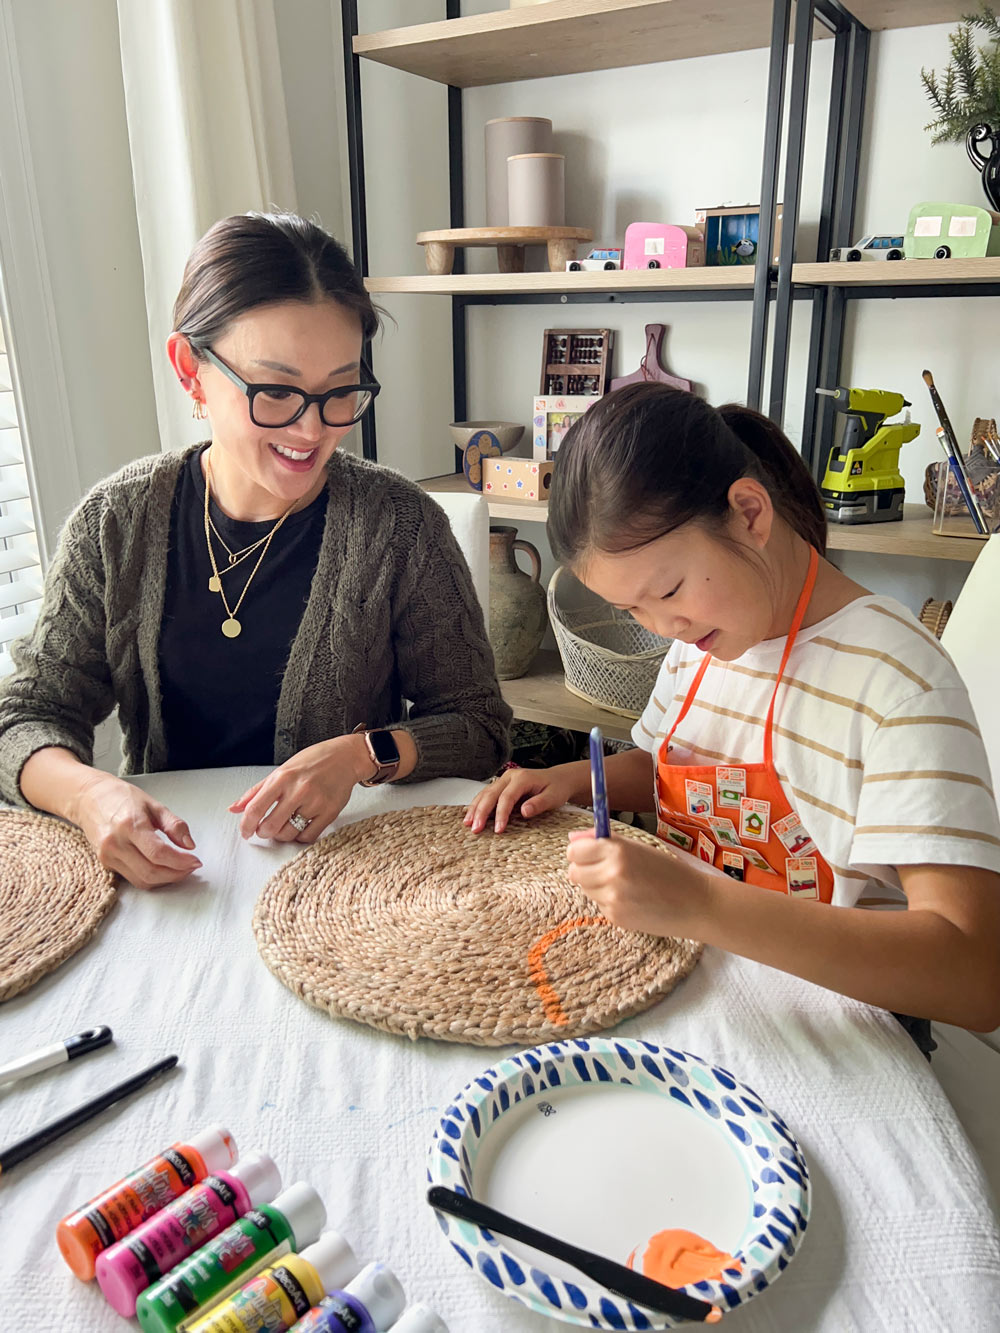 Two people painting a placemat with orange paint.